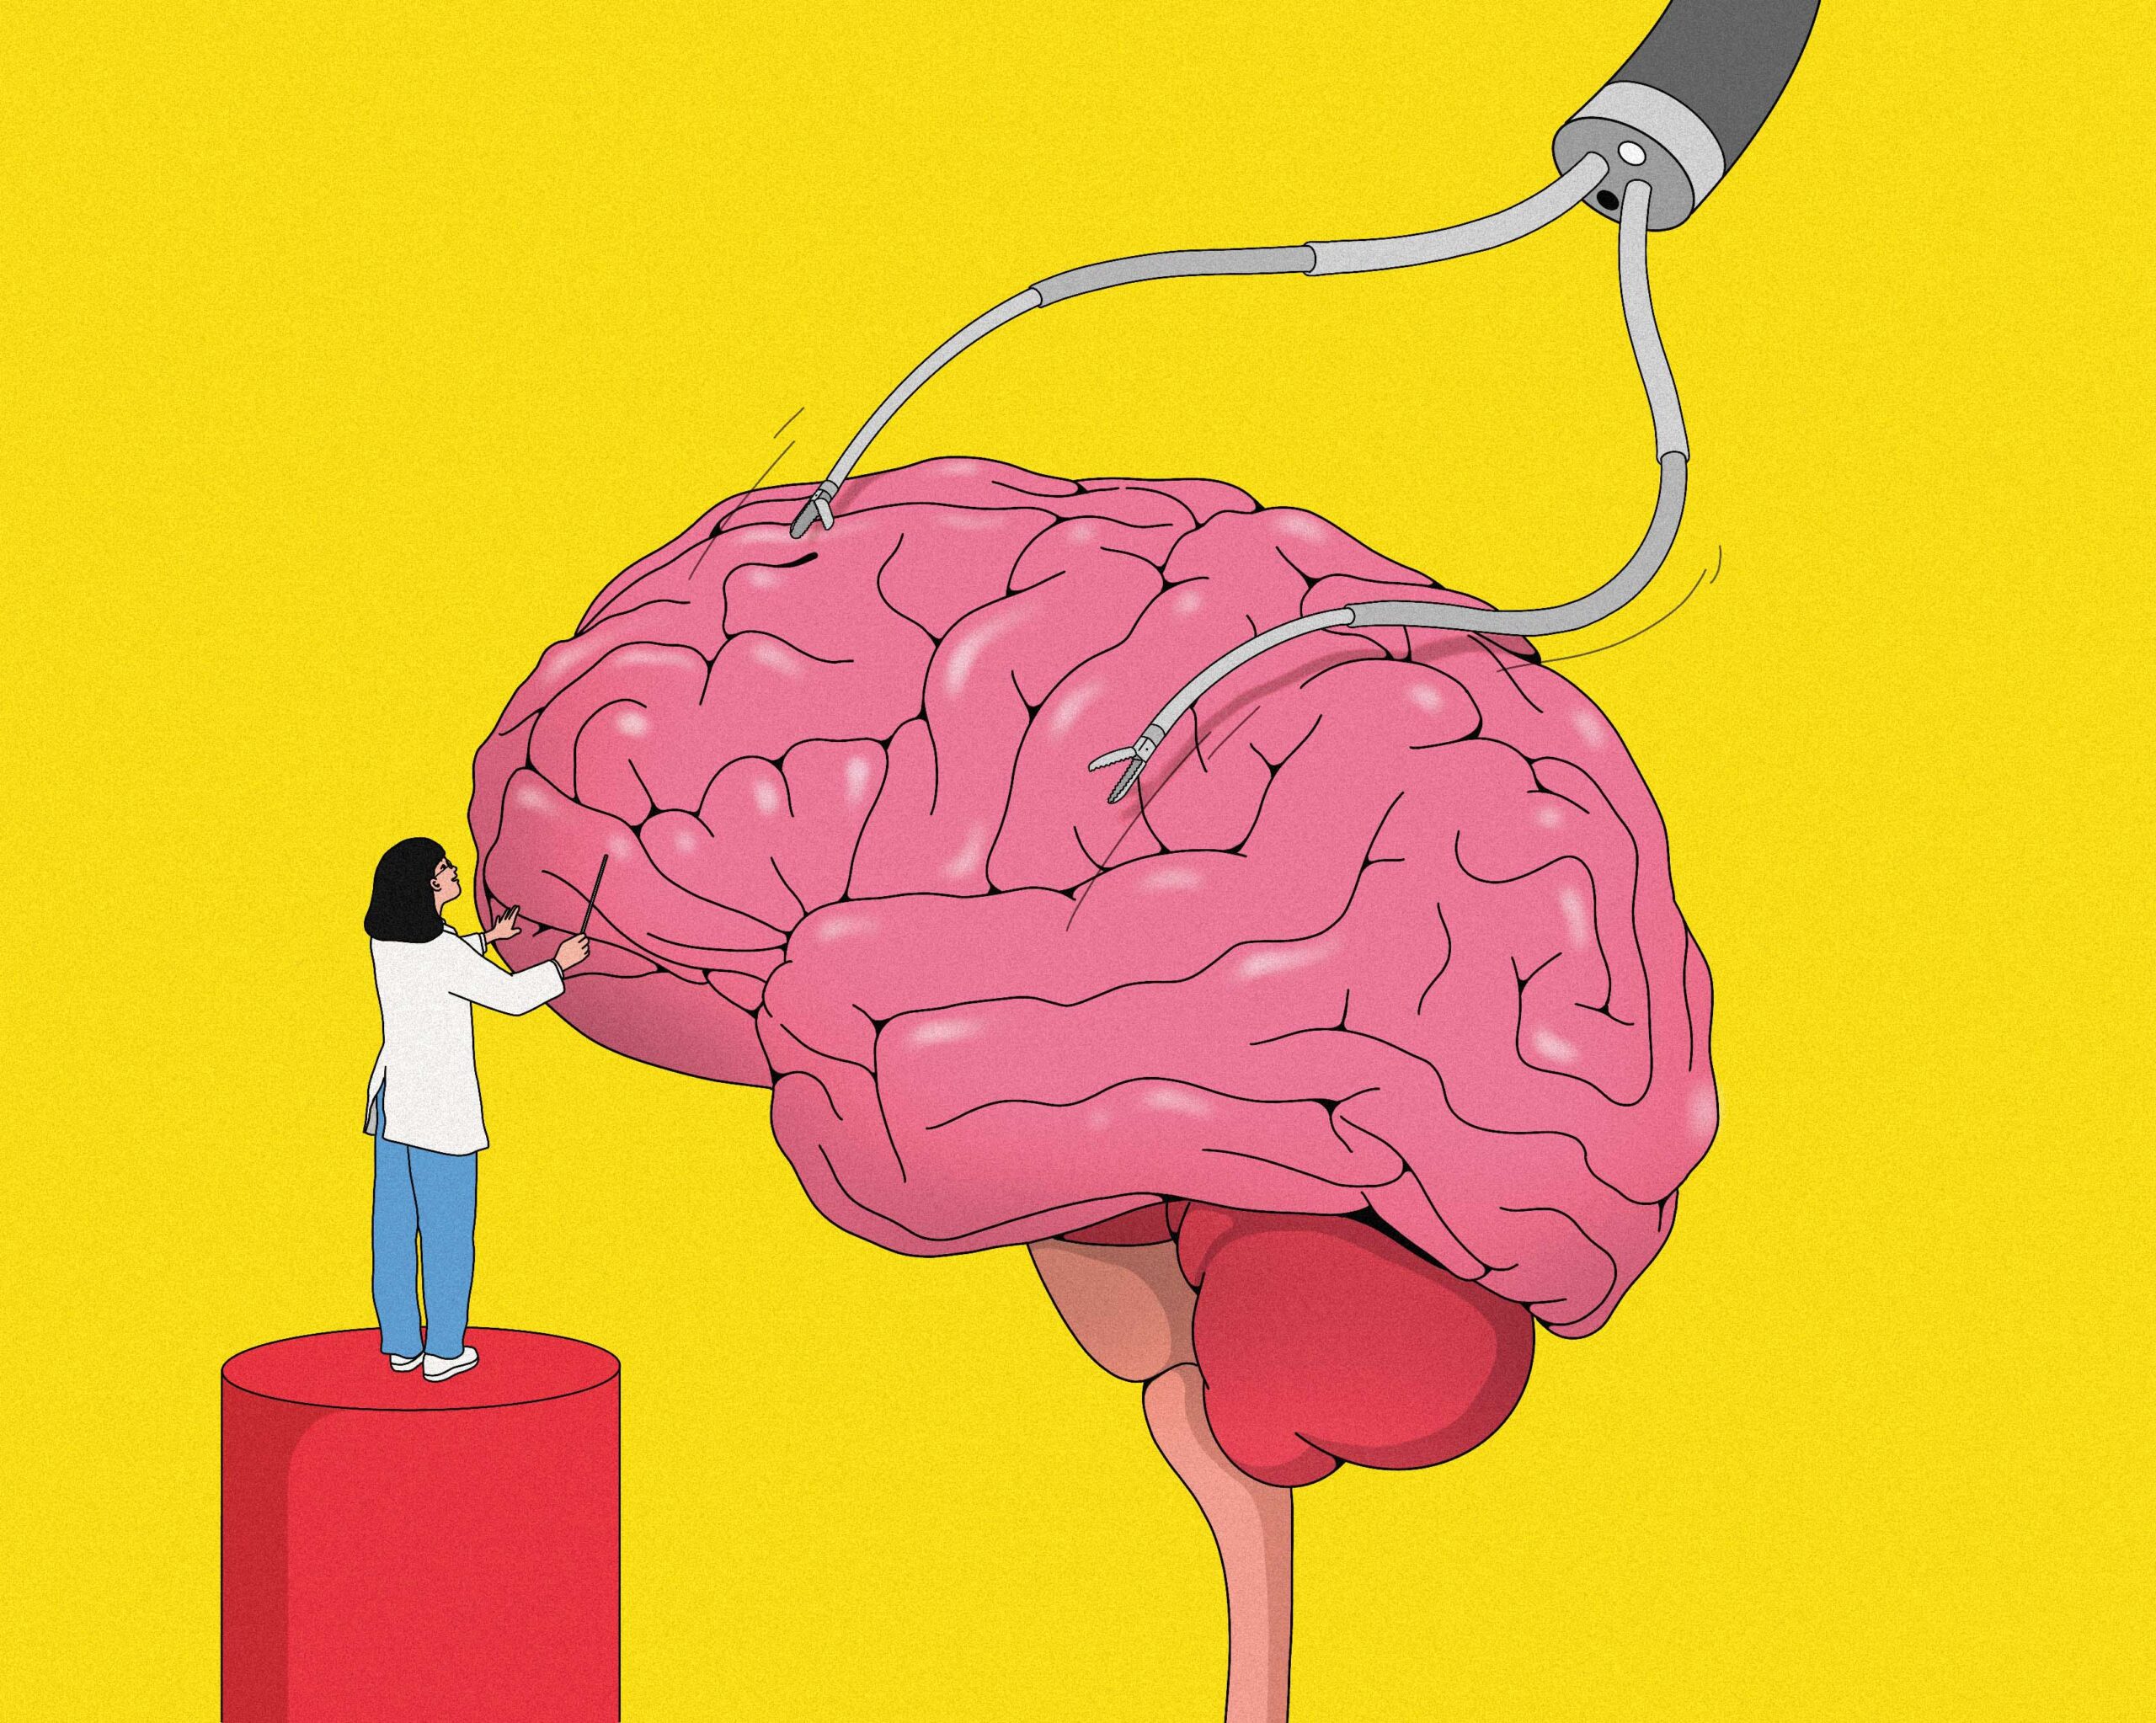 A small scientist on the left examining a huge brain in the centre, and a gripper robot hanging down from the top right is operating on the brain